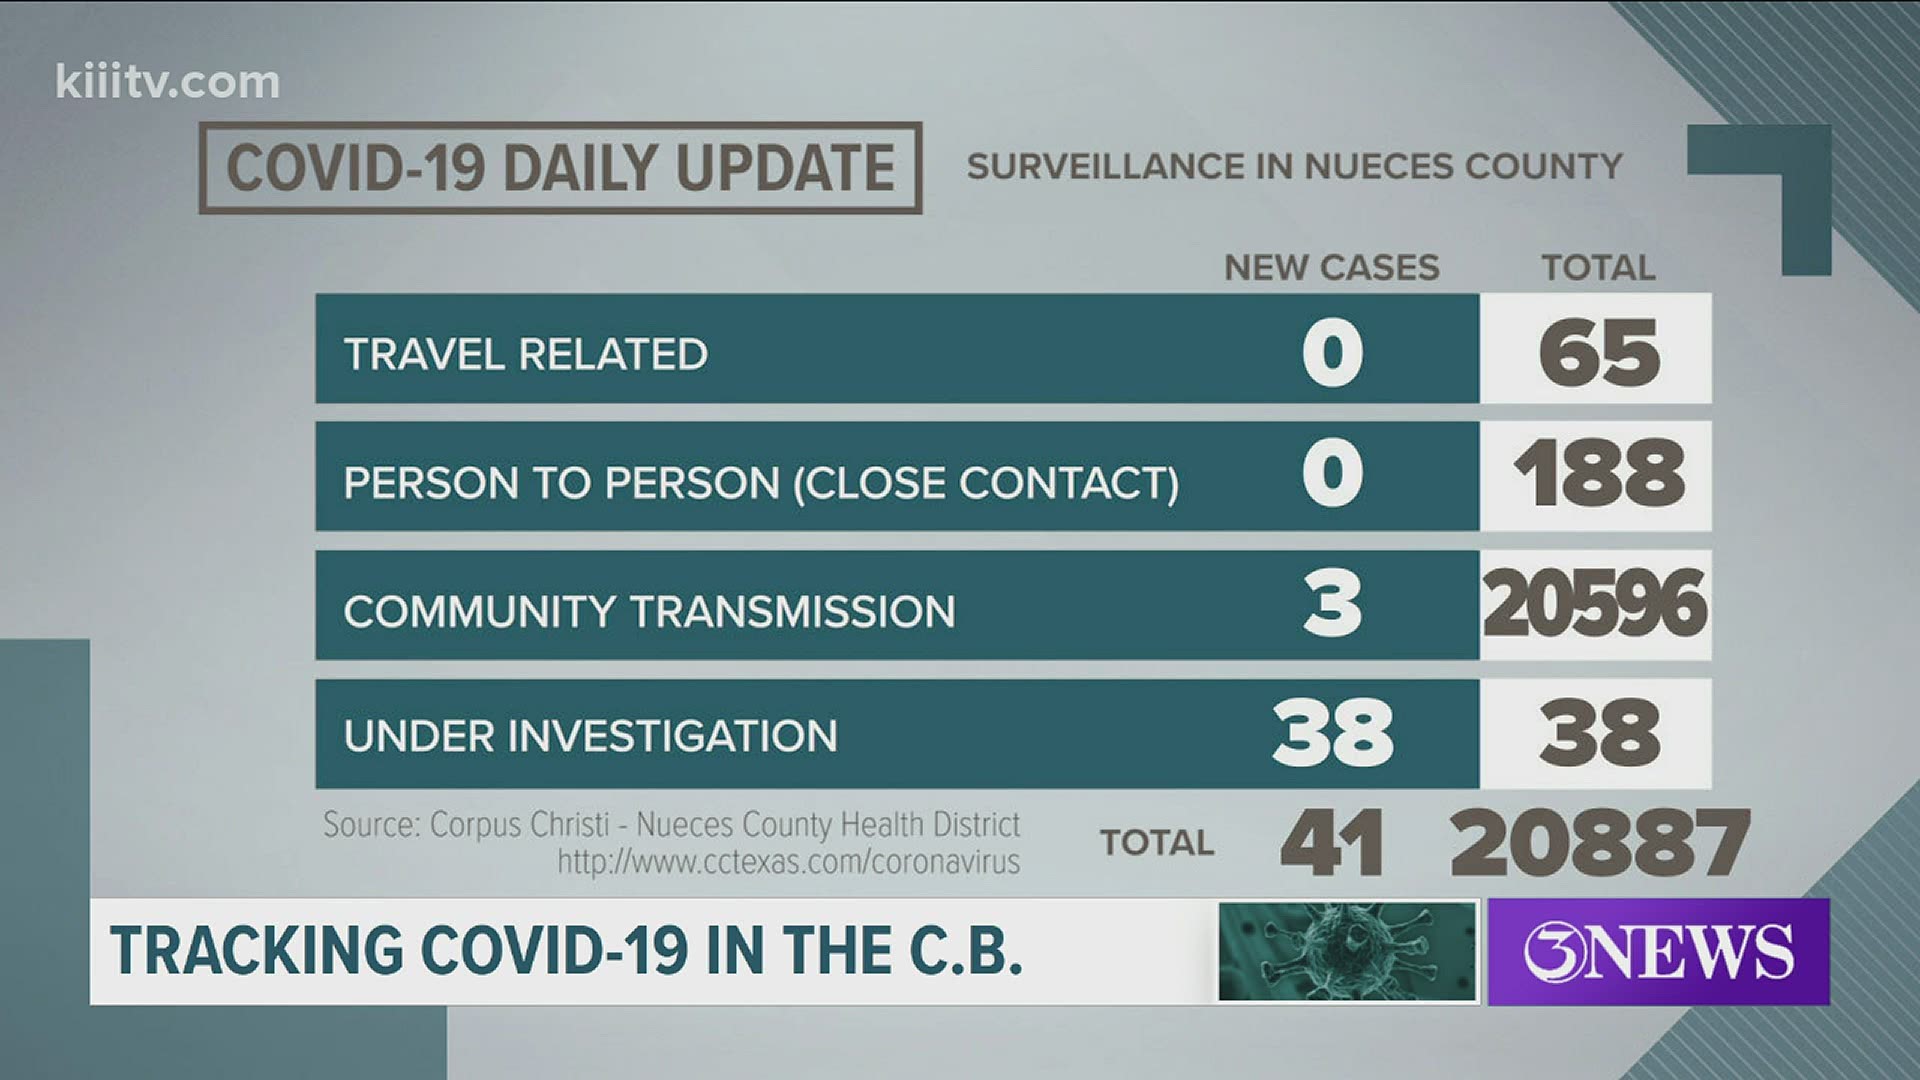 There were no COVID-19 related deaths reported on Thursday, October 15. Three of the new COVID cases are from the state's data dump.